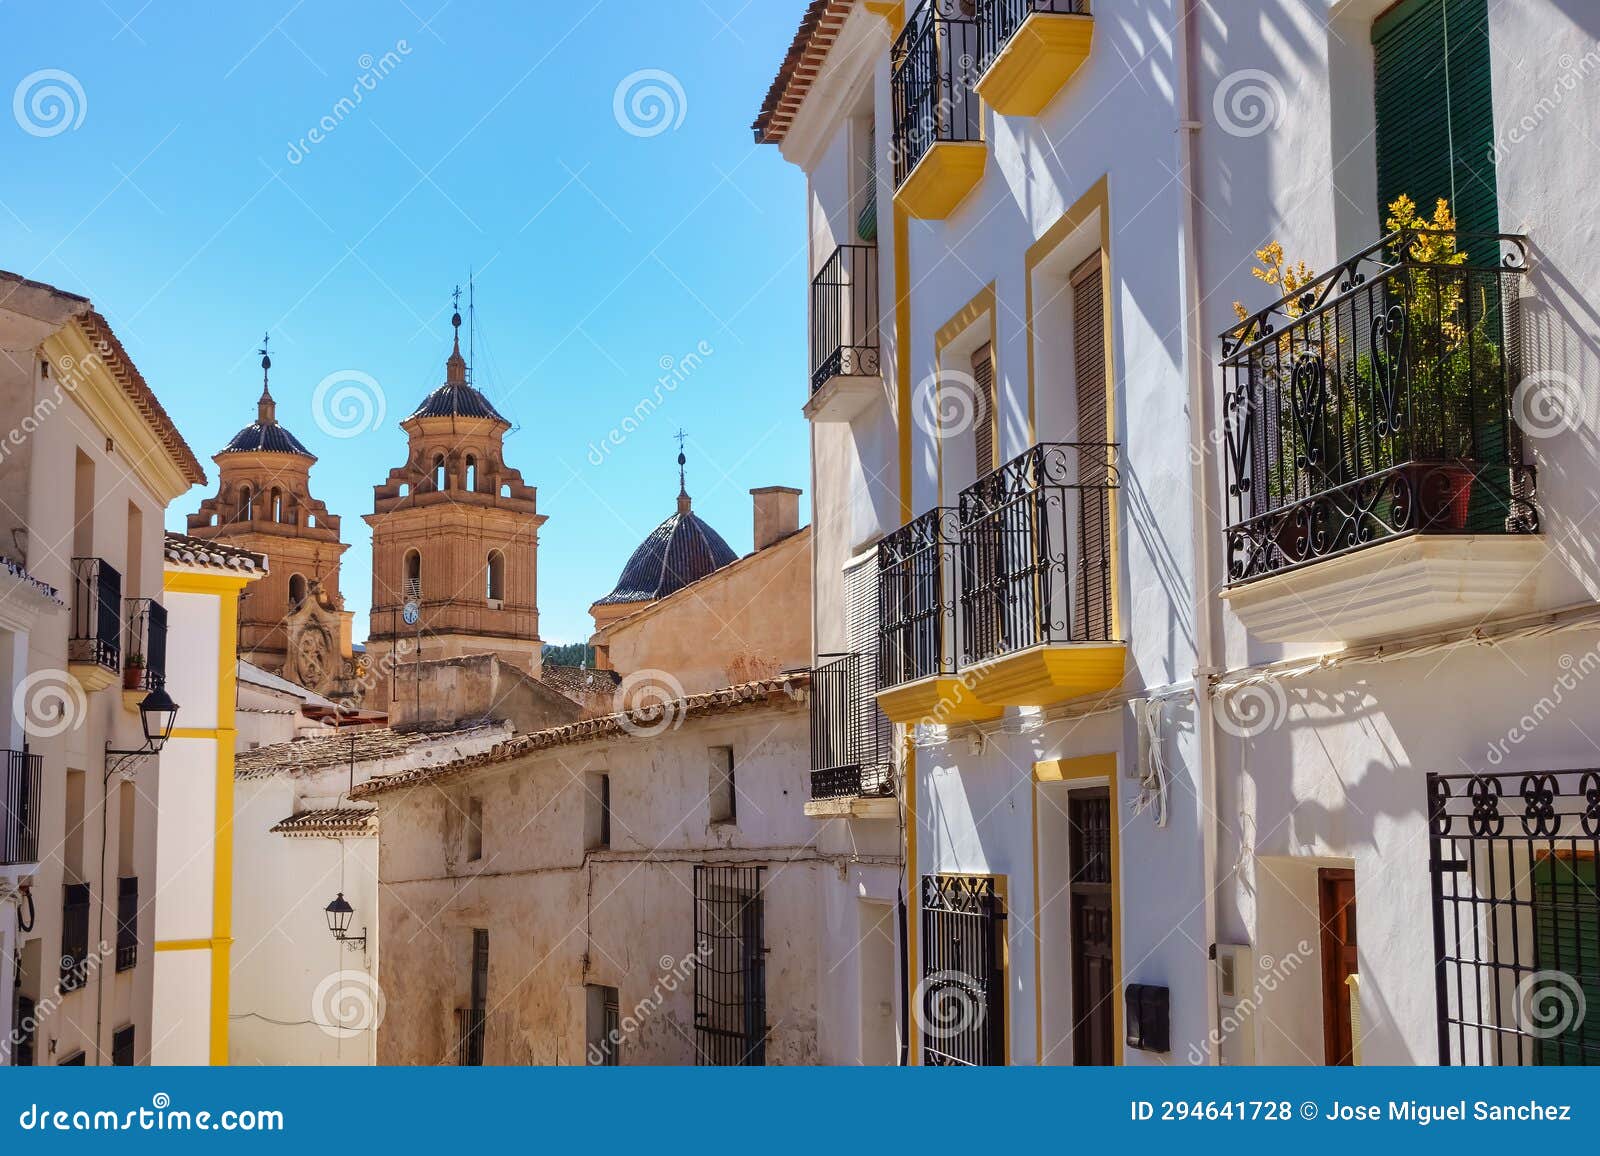 white andalusian village of velez rubio with its white houses and tall church towers, andalusia.